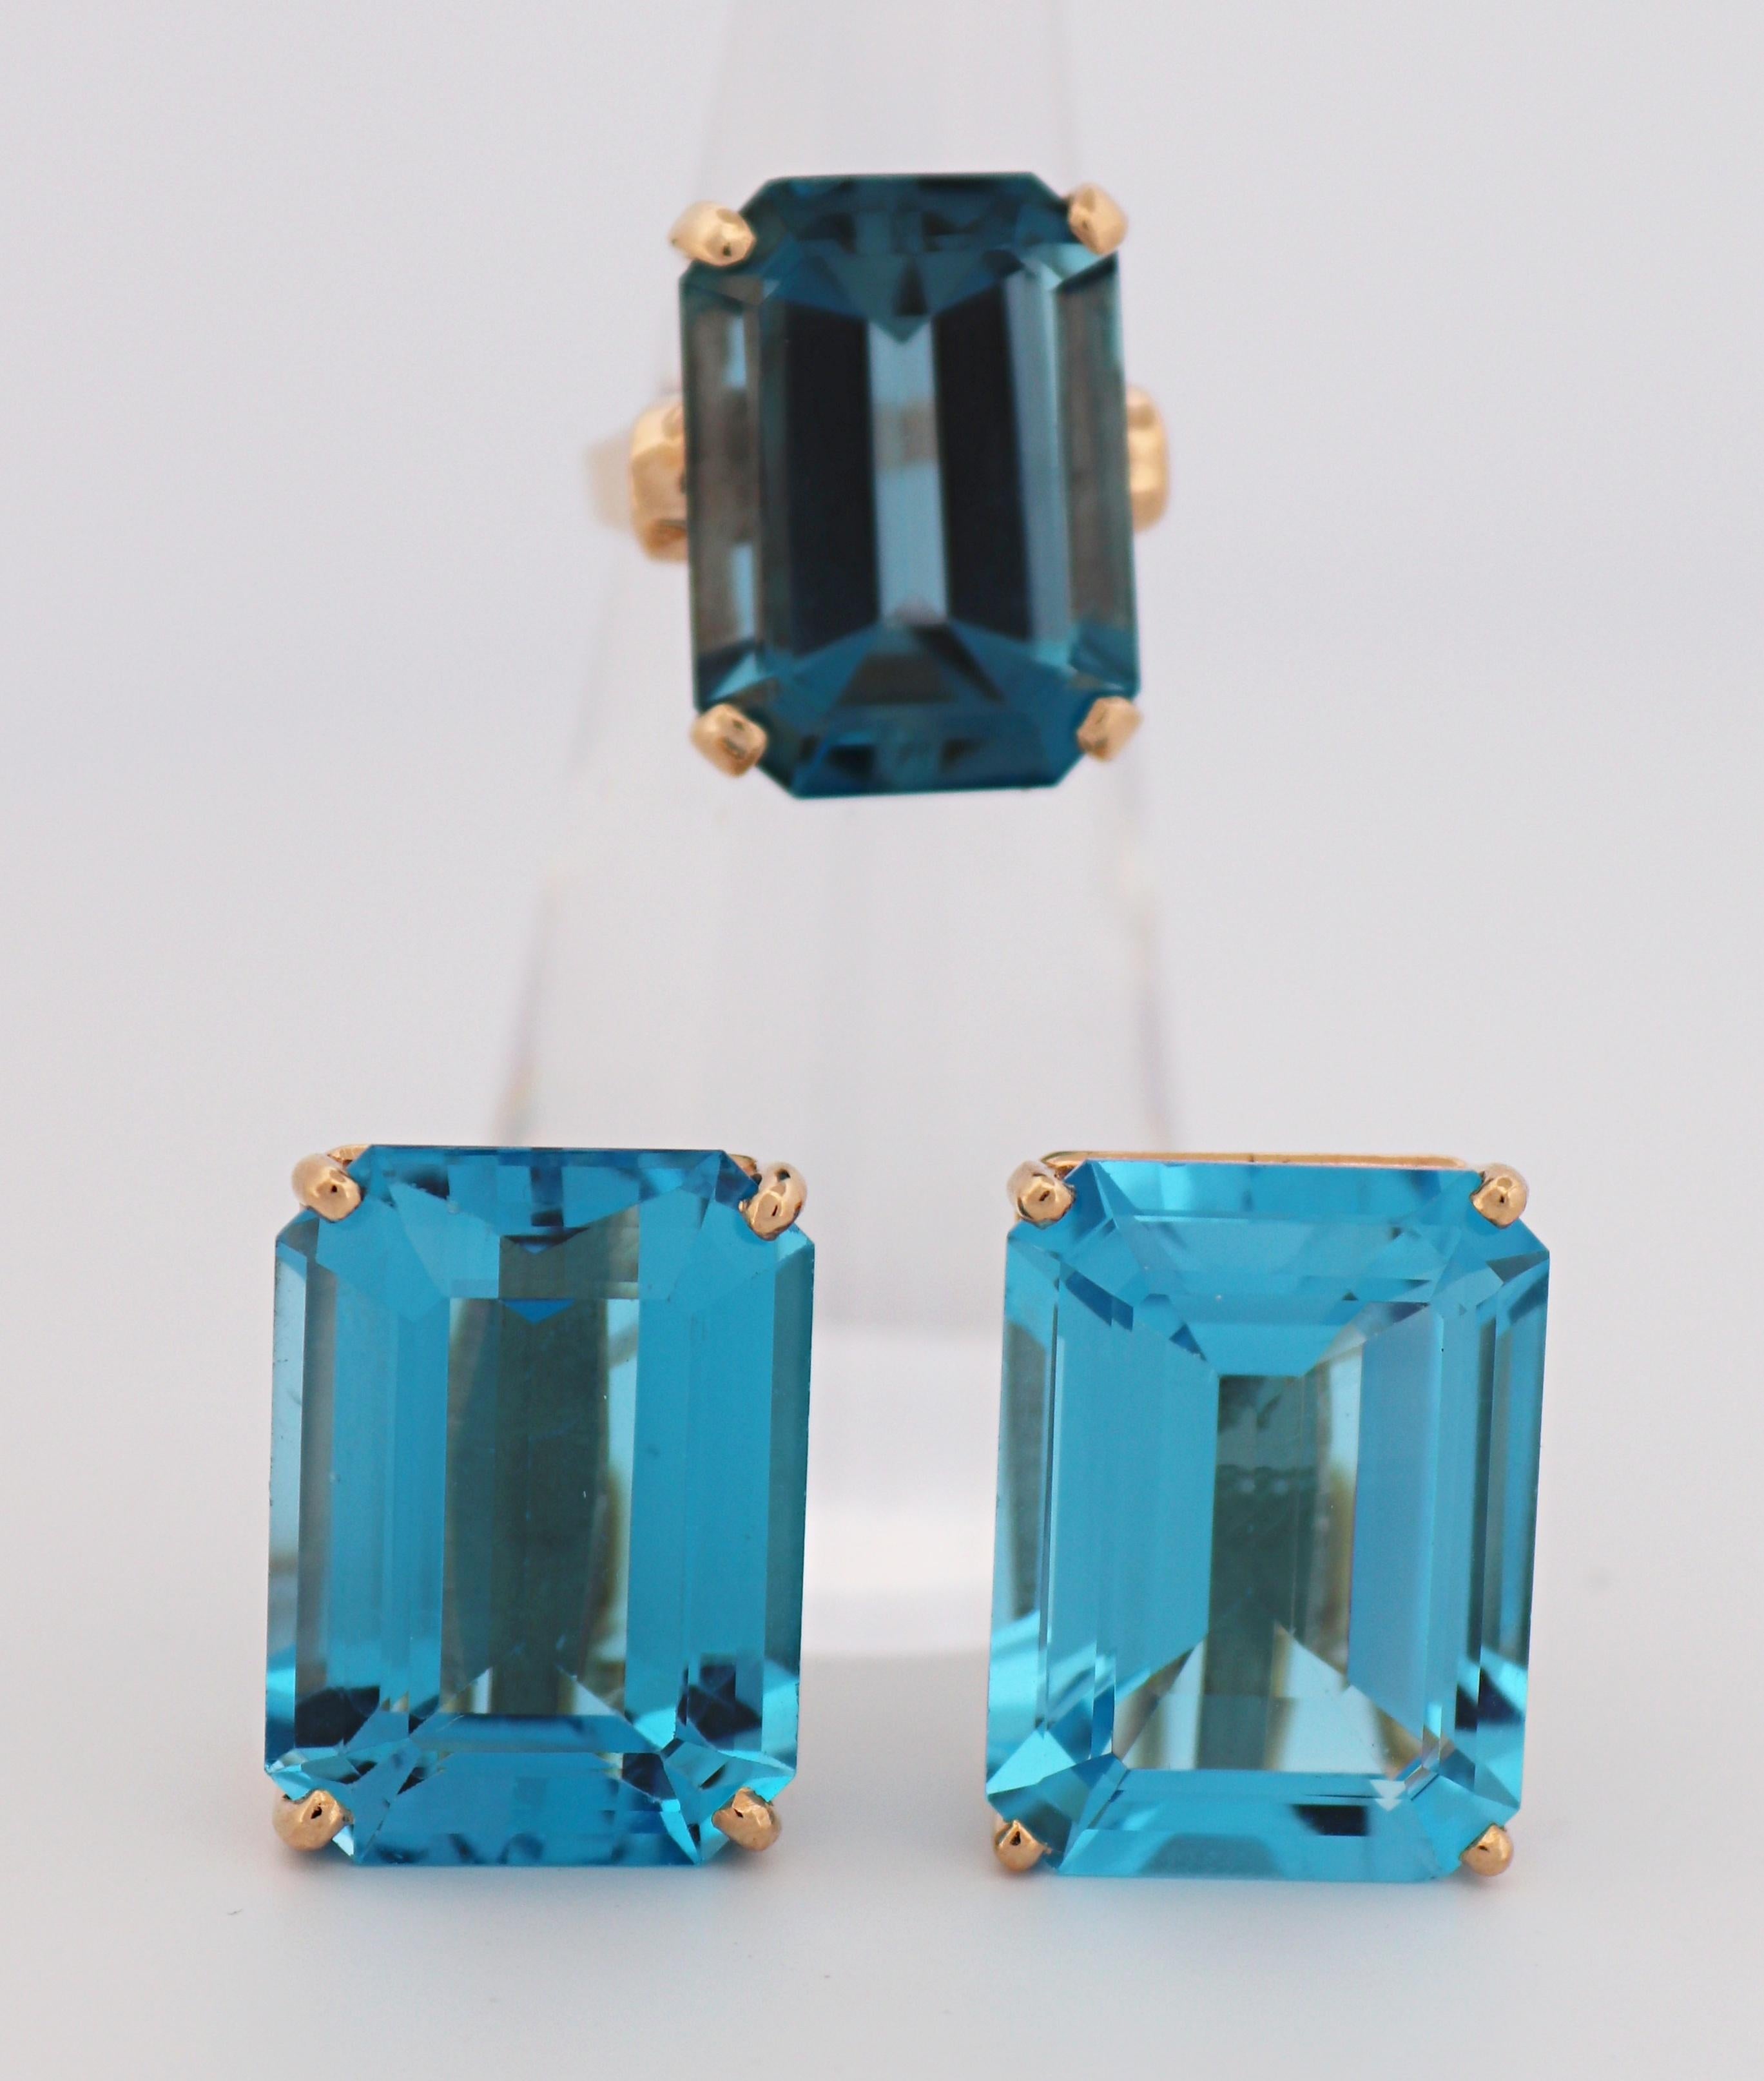 Composed one ring featuring (1) emerald-cut blue topaz, 16.70 cts., set in a 14k yellow gold mounting, 17.8 X 15.2 tapering to 1.7 mm, size 4.5, Gross weight 7.23 grams; together with a pair of matching earrings, featuring (2) emerald-cut blue